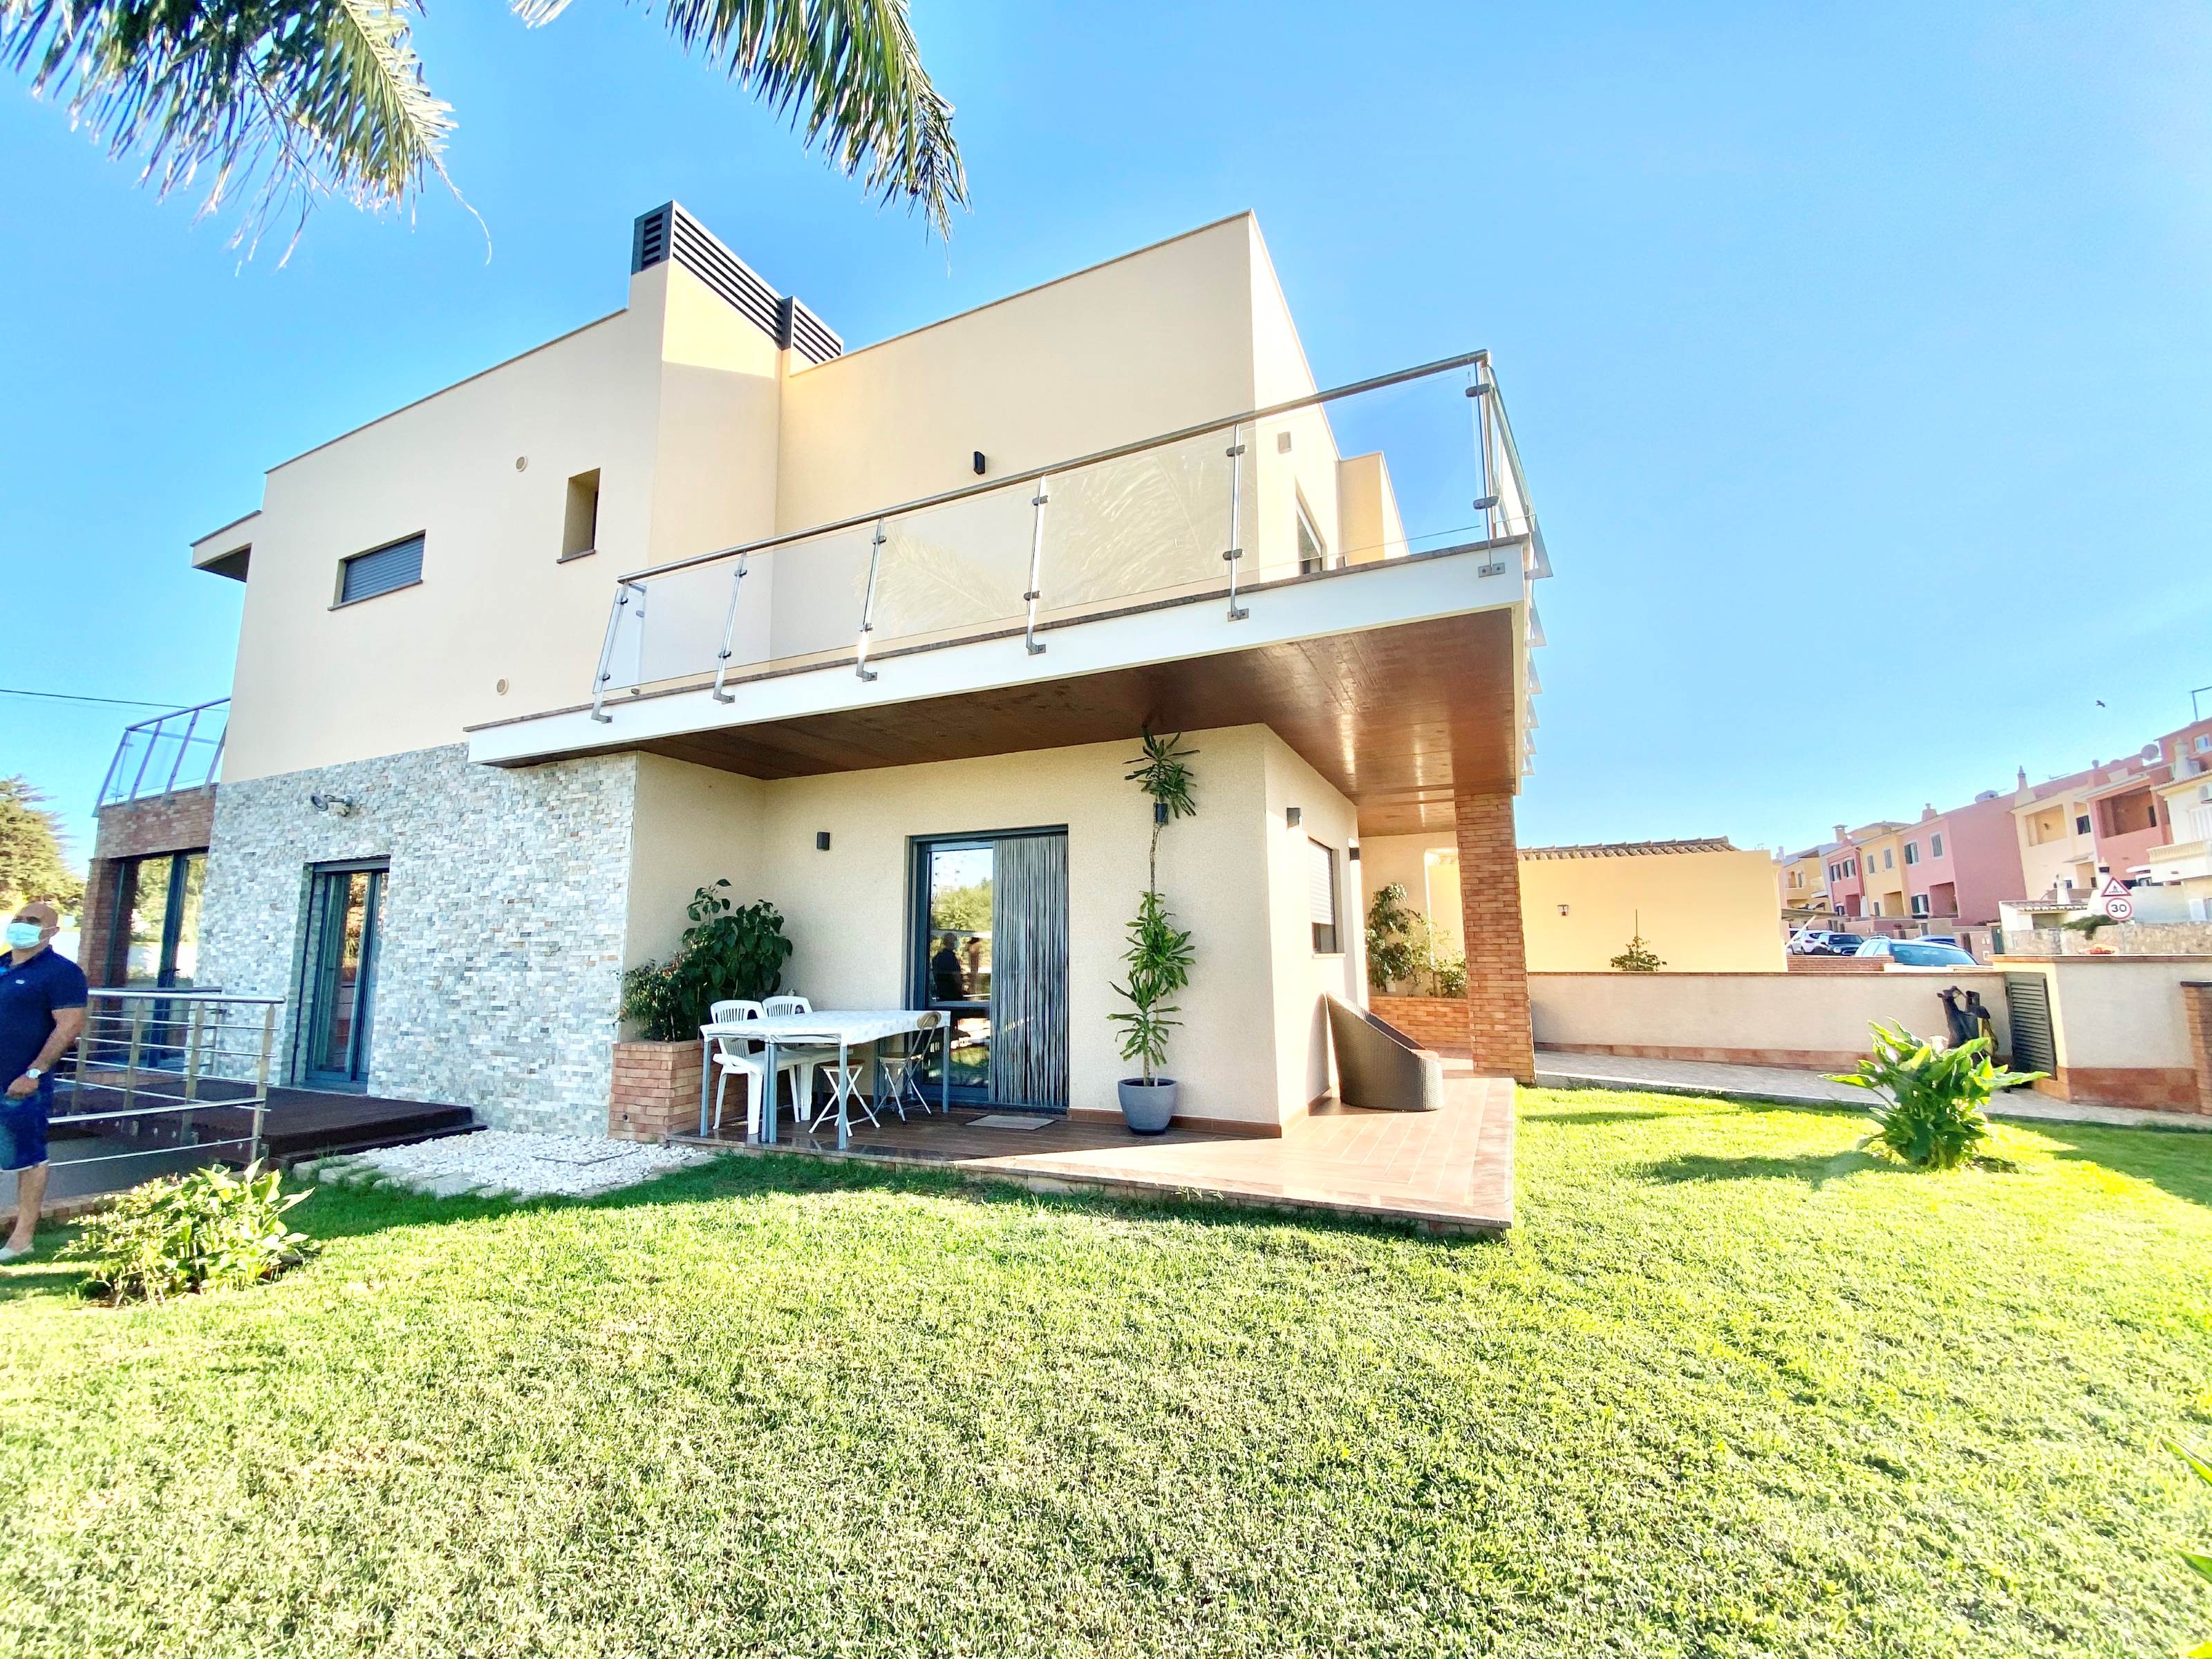 3 bedroom villa, garage 5 minutes from the Gulf of Palmares.